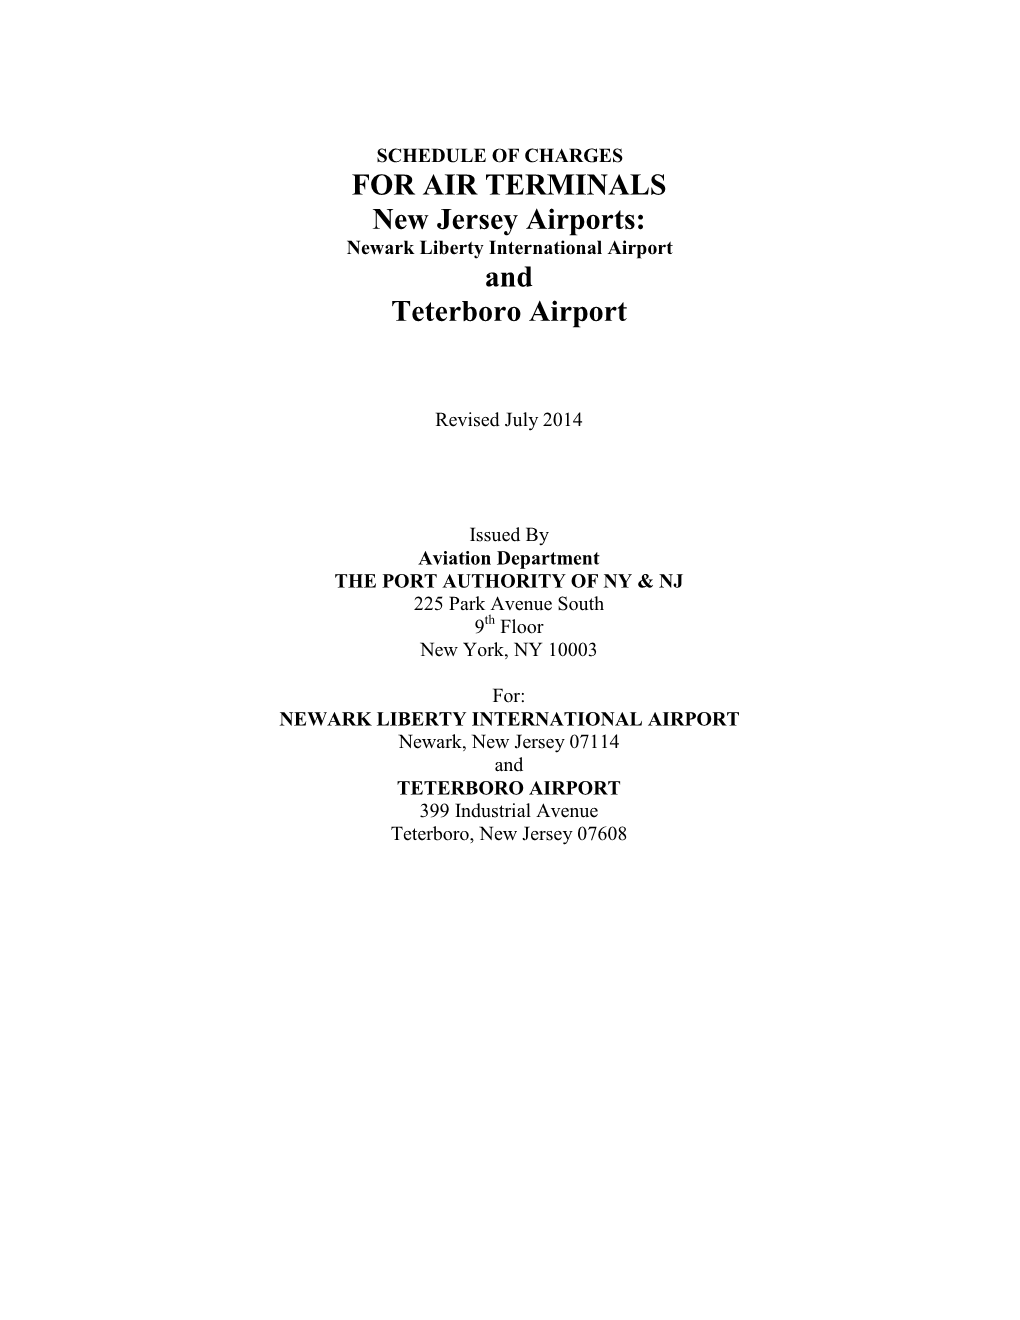 FOR AIR TERMINALS New Jersey Airports: and Teterboro Airport